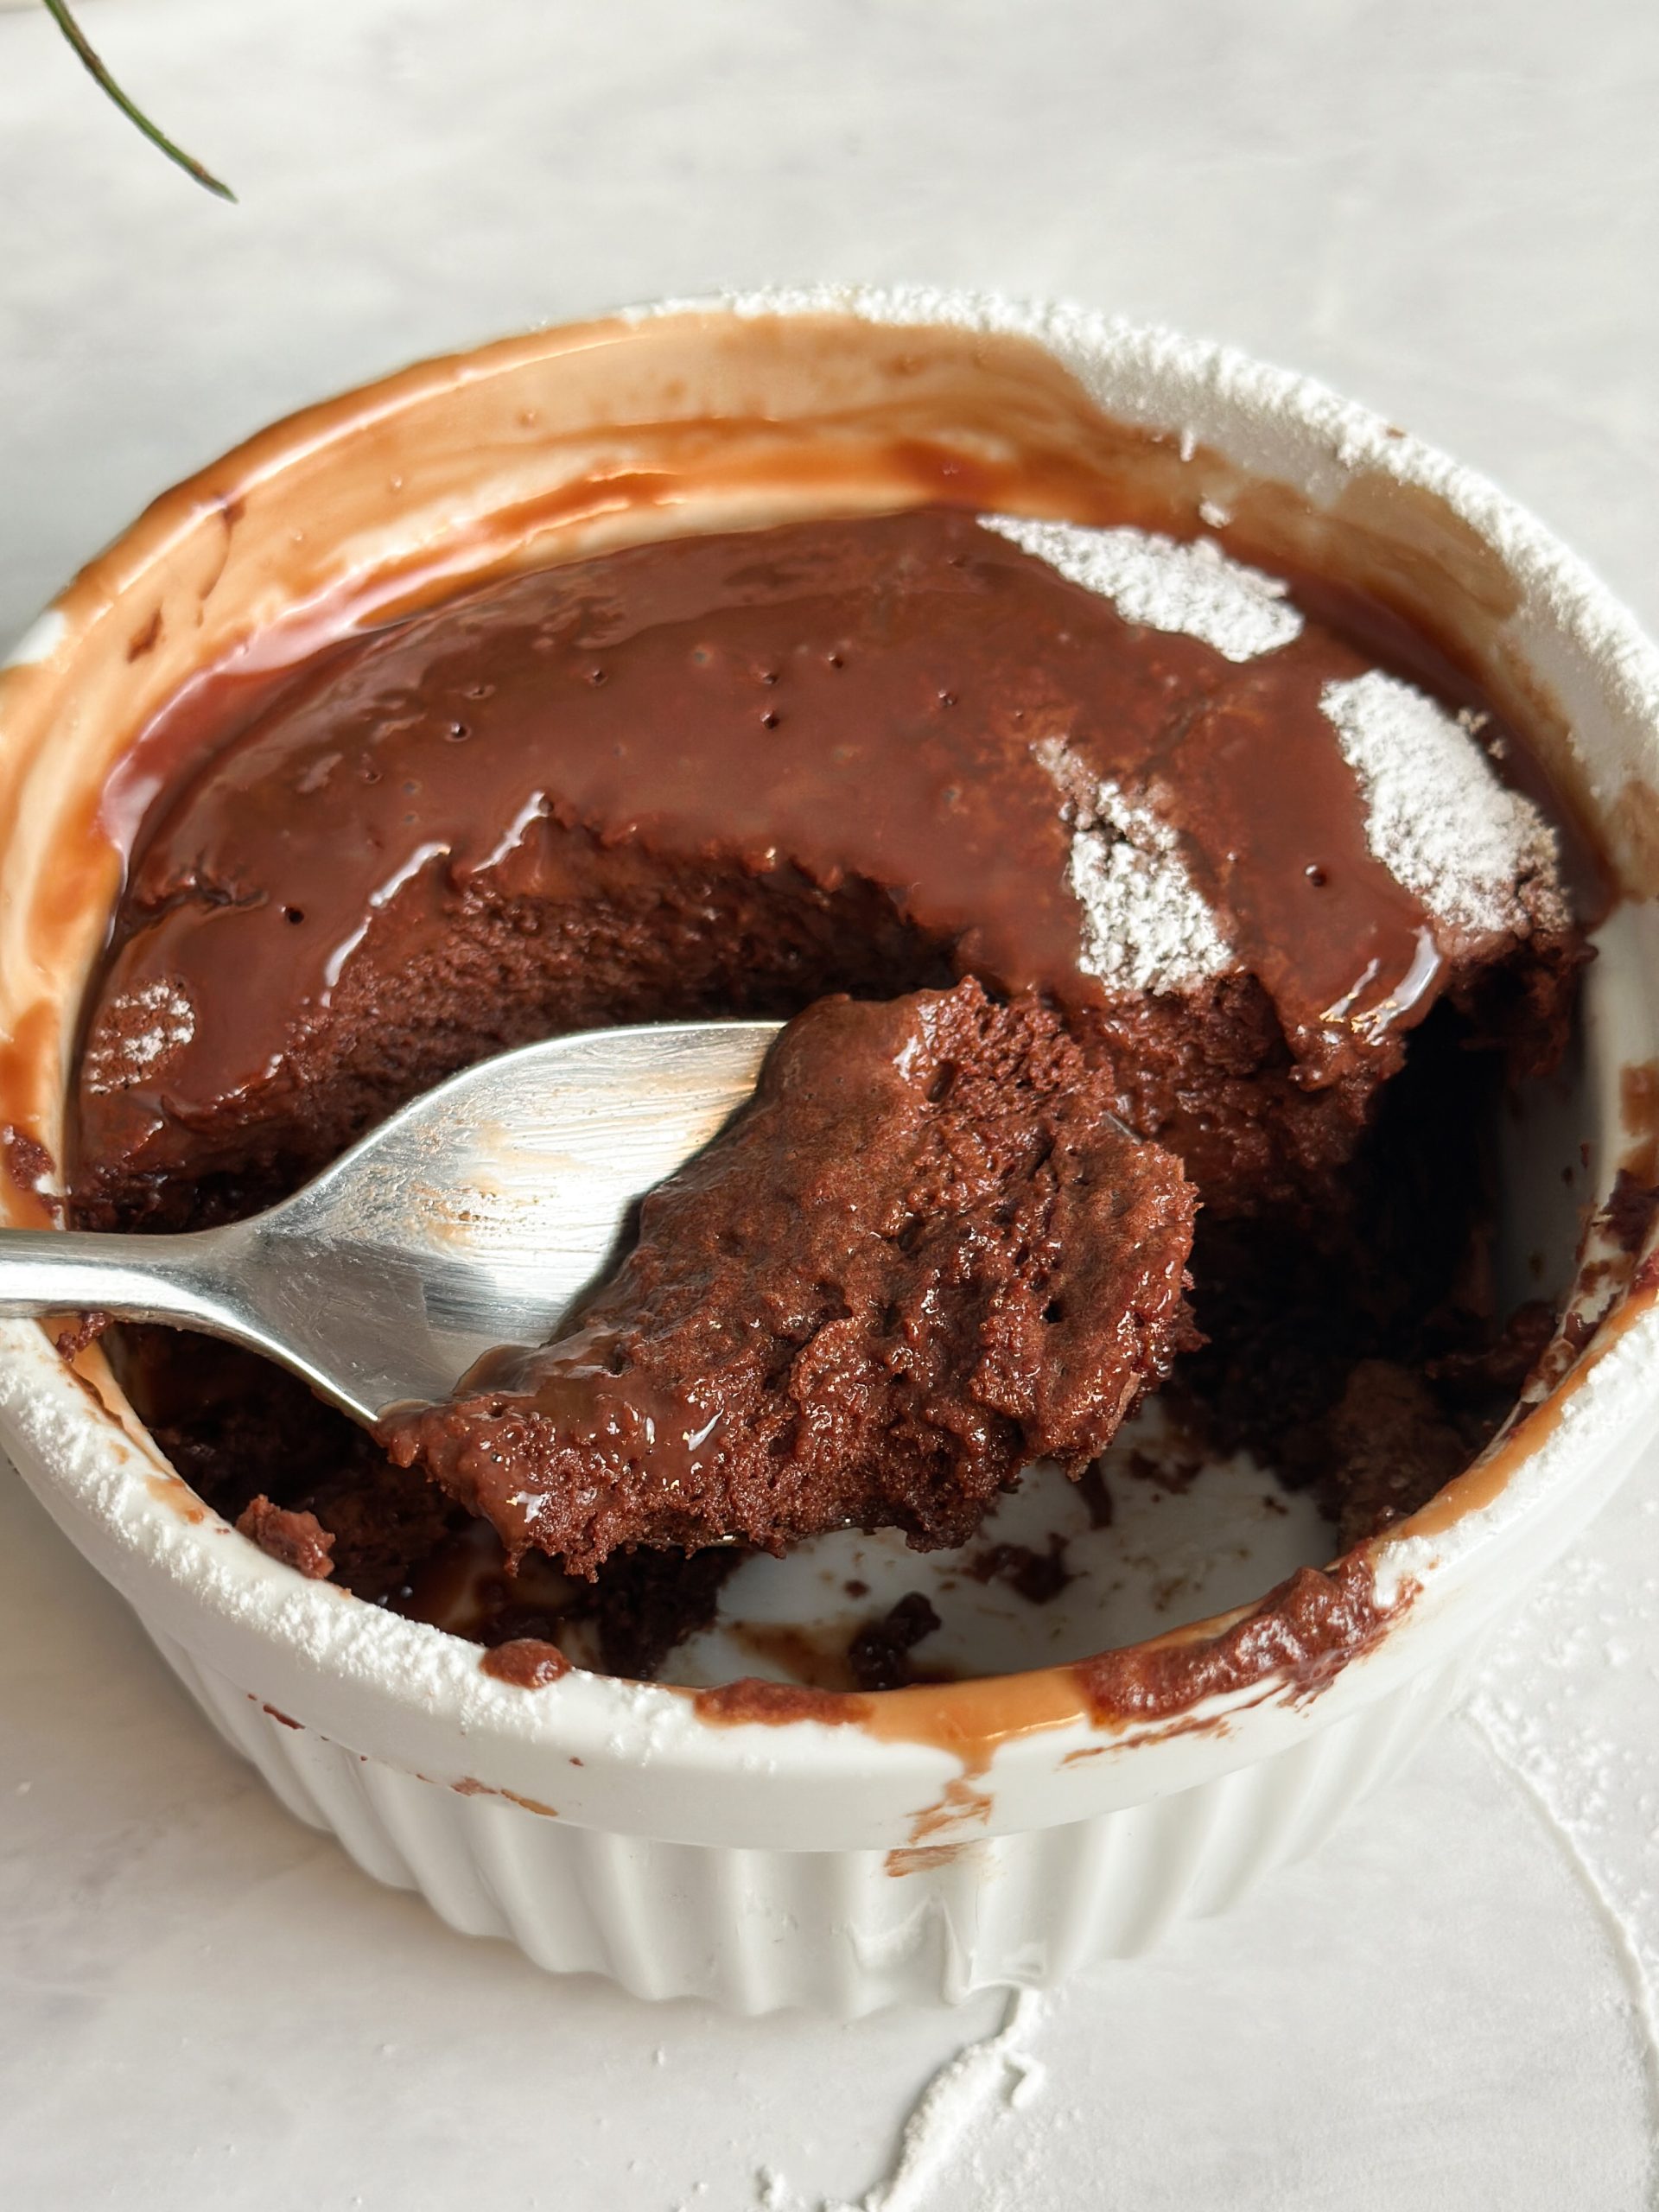 Spoon taking bite out of chocolate souffle showing light and airy texture inside